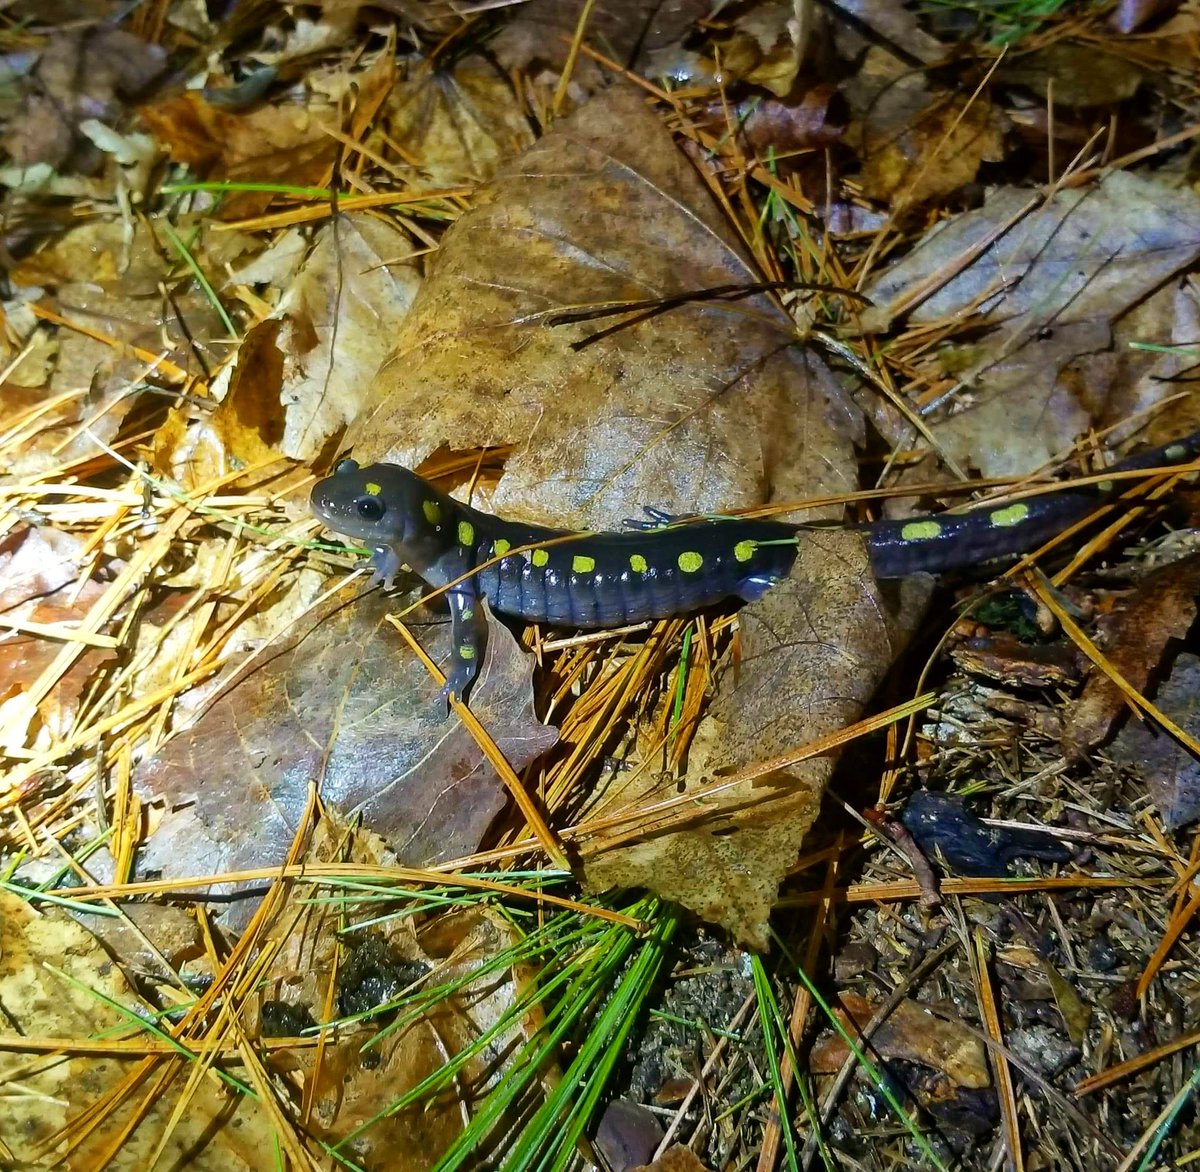 It’s almost spring cleaning time, so remember to #LeaveTheLeaves! Many species of amphibians, reptiles, and invertebrates will continue to use leaf litter in early spring for their dormancy period. If possible, wait until late spring to clean up your yard!

📸: Joey Cannizzaro